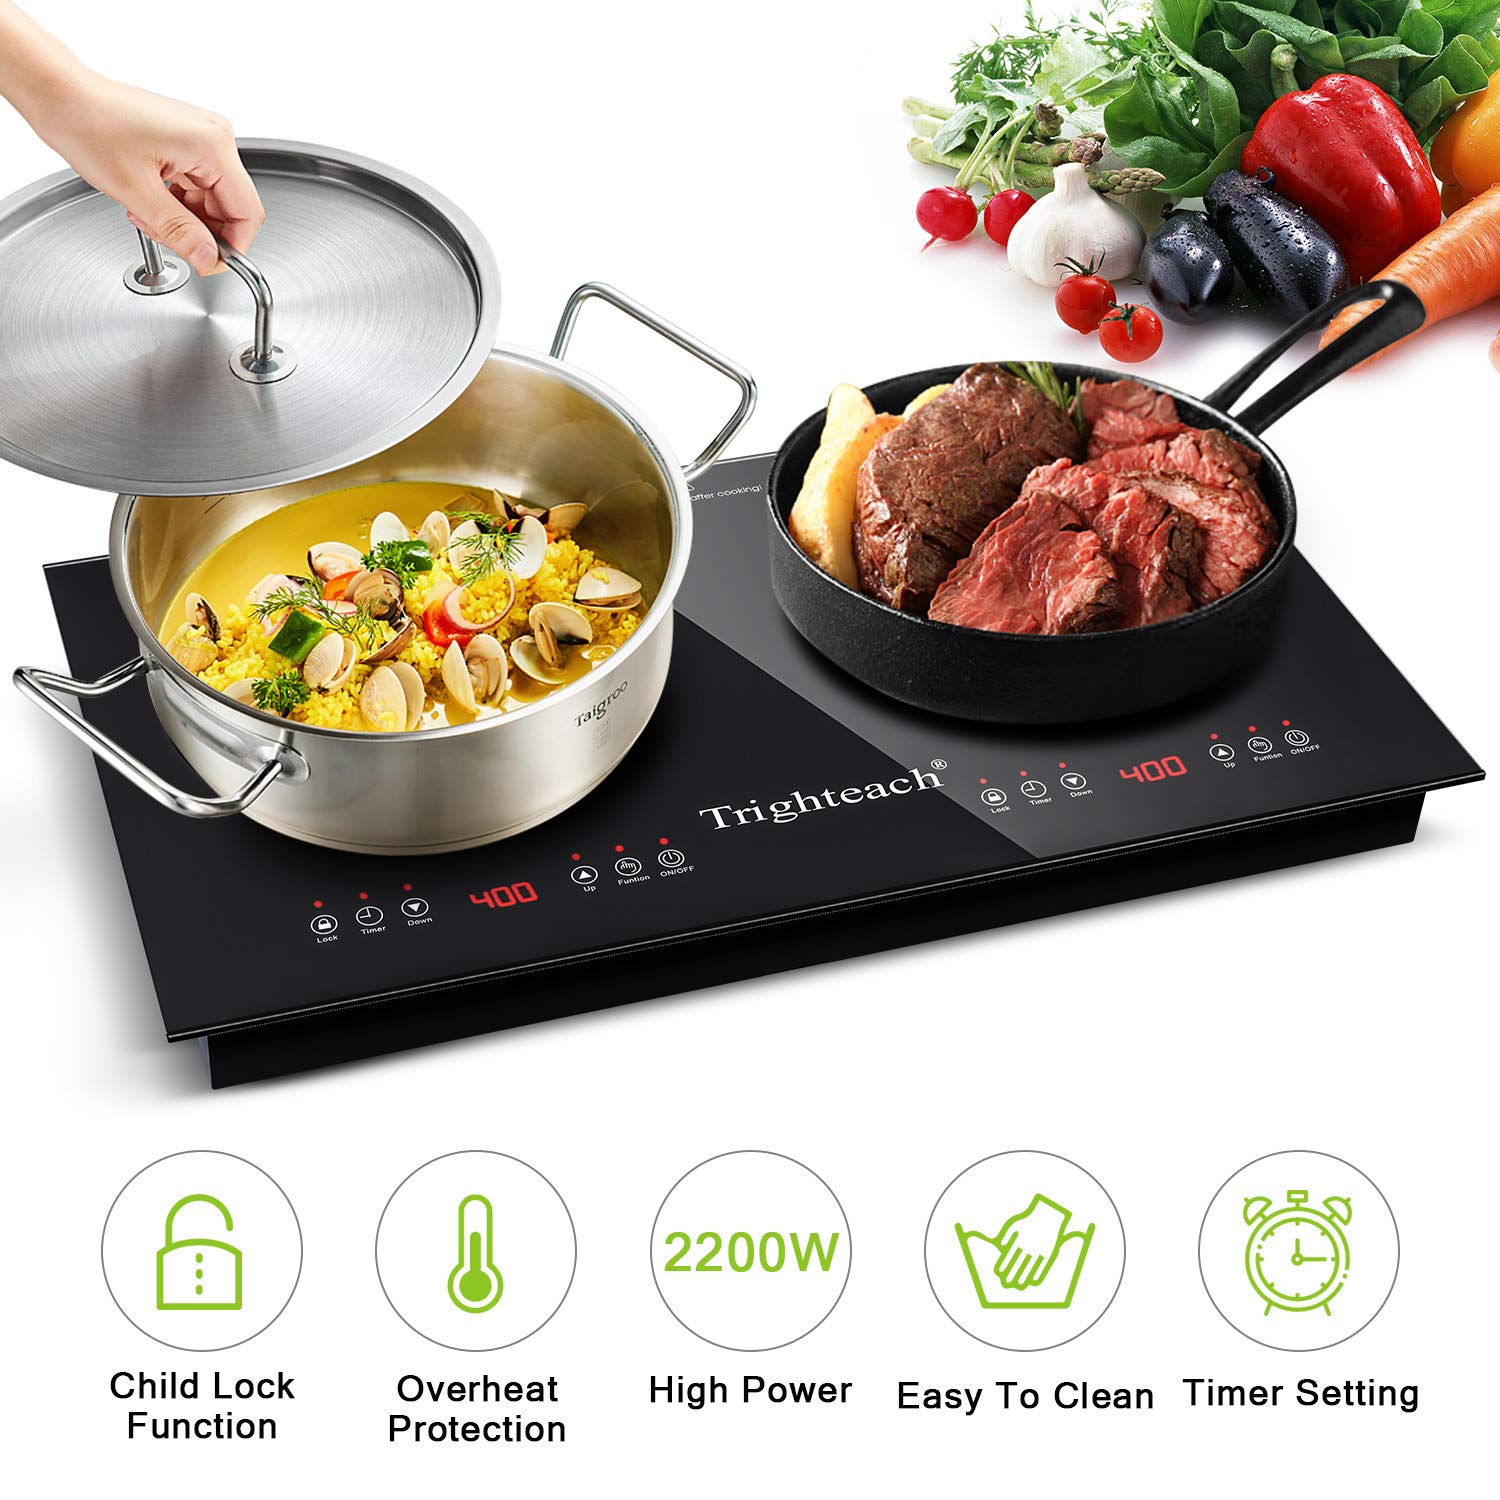 trighteach portable induction cooktop